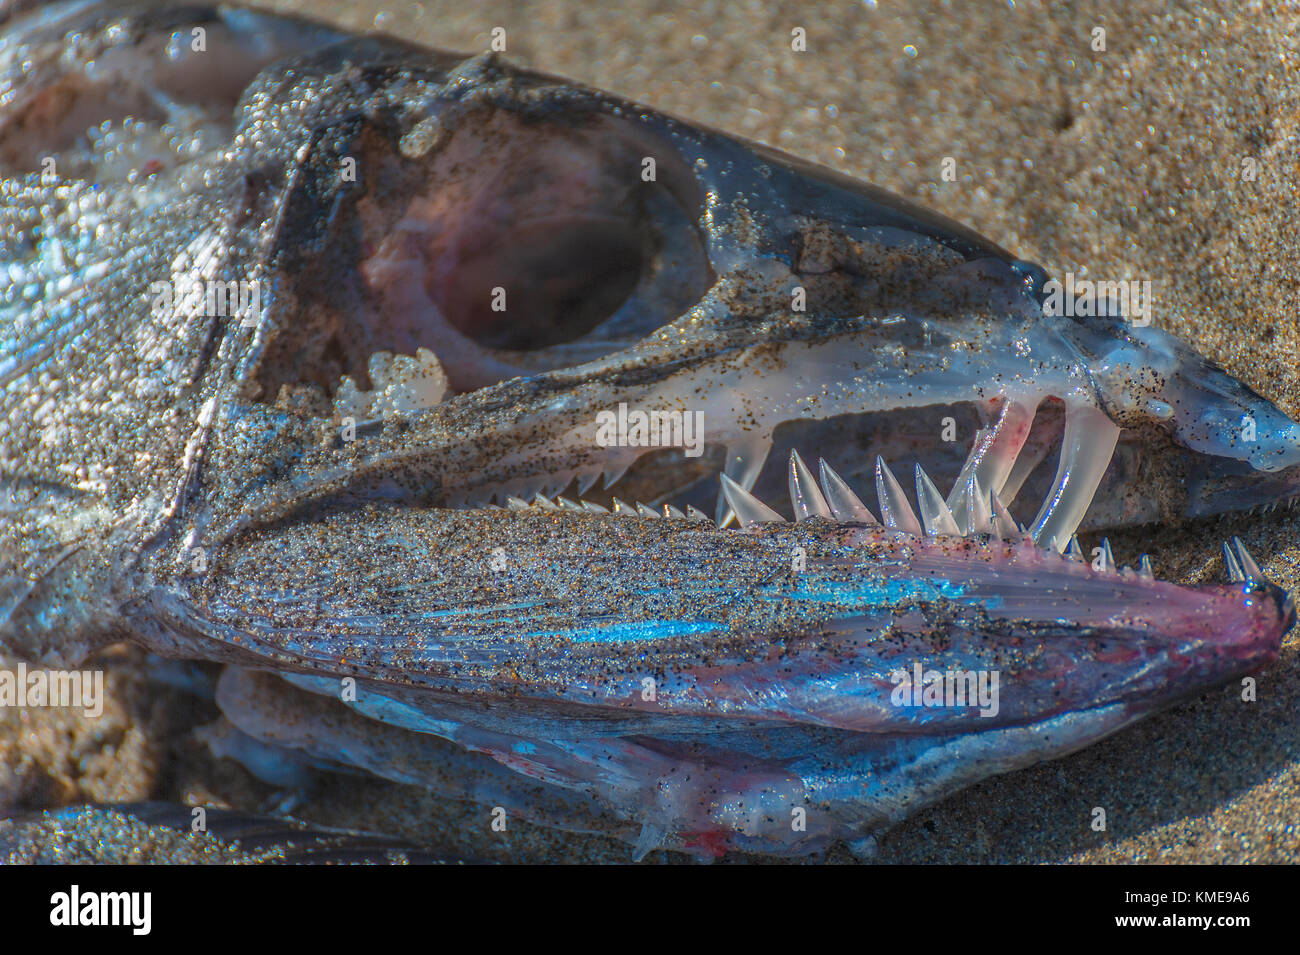 Remains of a Lancet fish that washed ashore at Pacific City on the Oregon Coast.  Close up of it's large empty sockets and jelly looking sharp teeth. Stock Photo